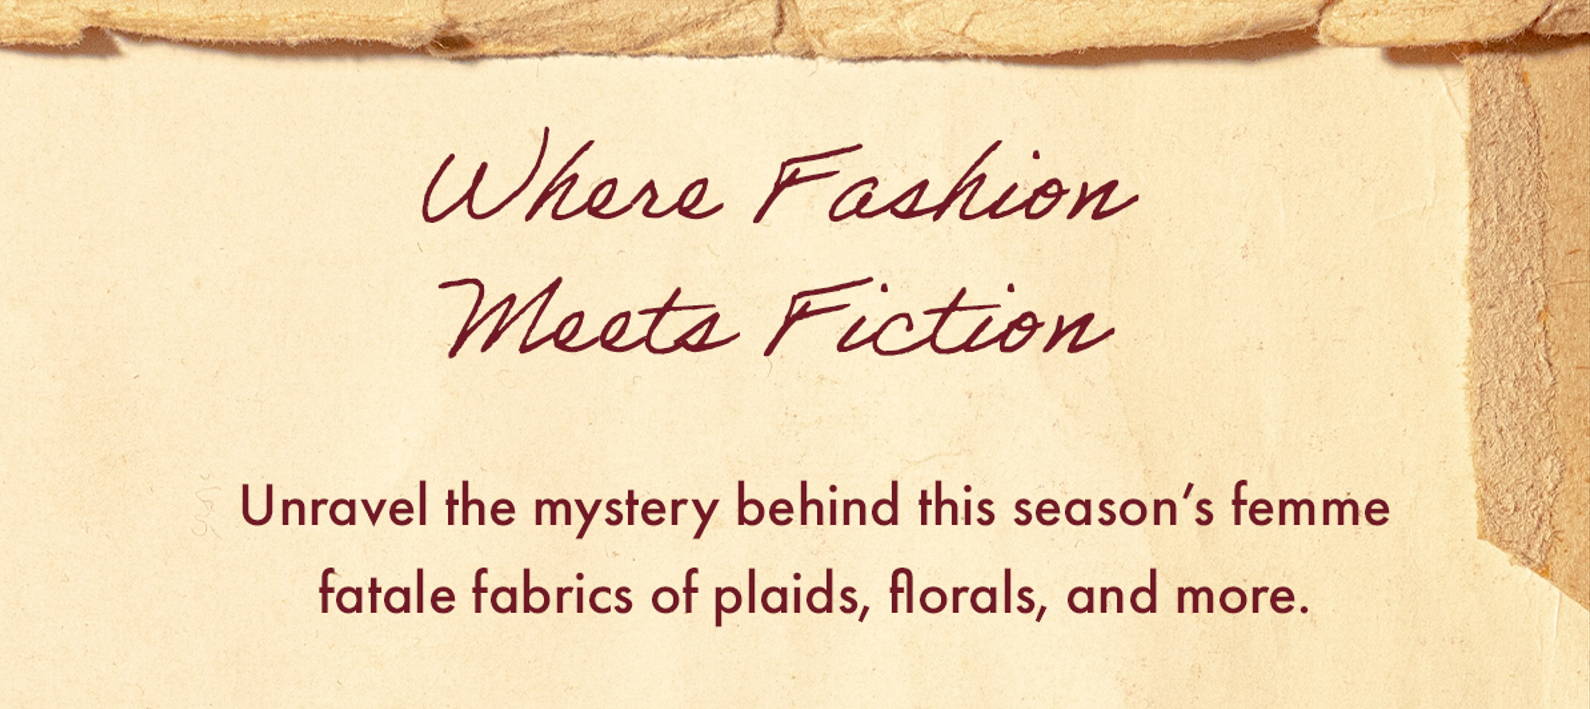 Where Fashion Meets Fiction - Unravel the mystery behind this season's femme fatale fabrics of plaids, florals, and more. 